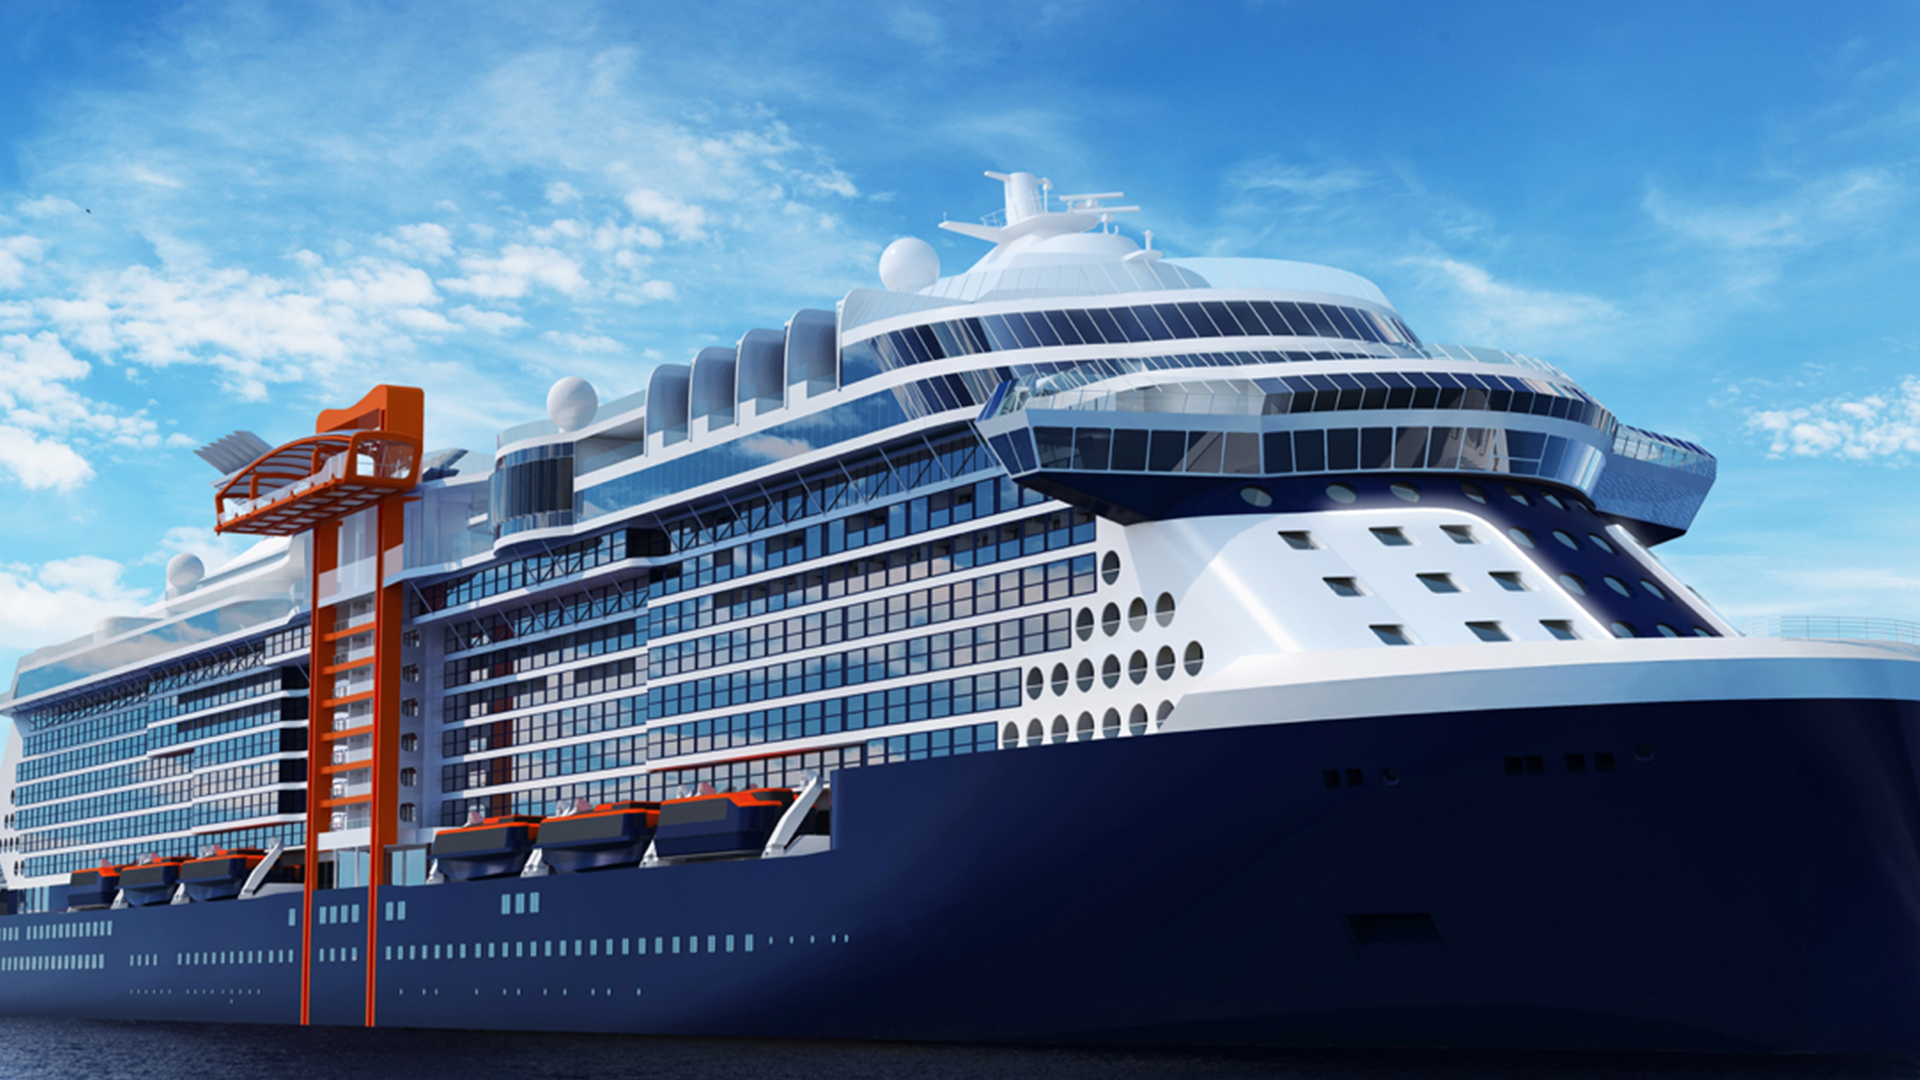 Welcome to a new age of cruising